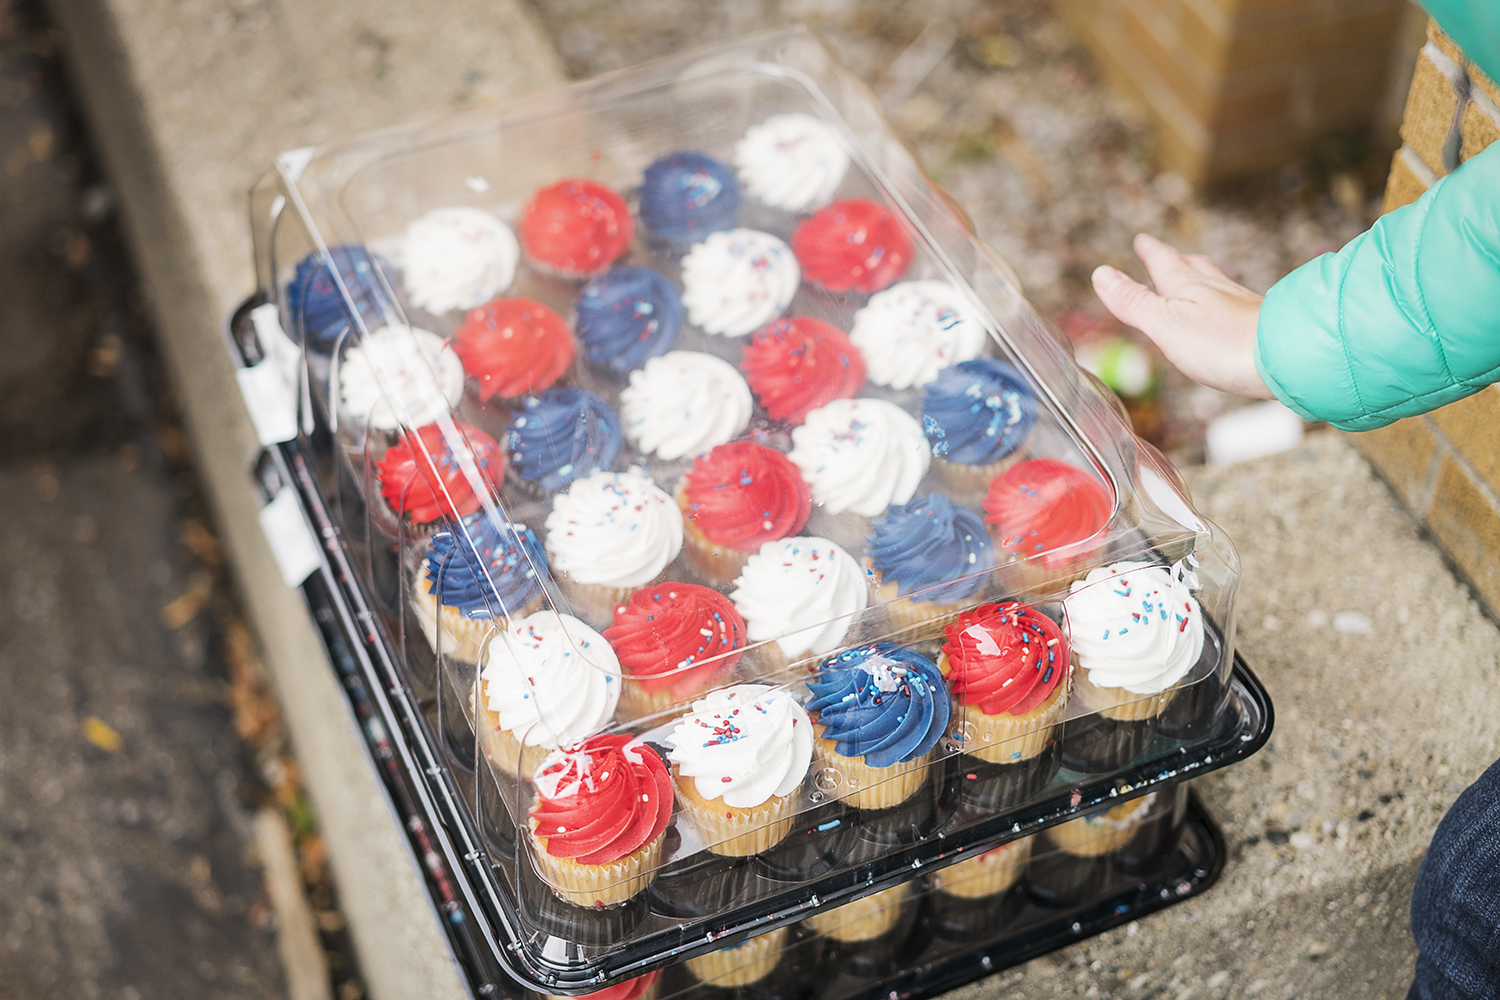 Dozens of red, white and blue cupcakes wait to be loaded onto the trailer before departing Riverside Tabernacle Church to the Flint Community Cookout. The volunteers bring various snacks and food for the community, all paid for by fundraisers hosted 